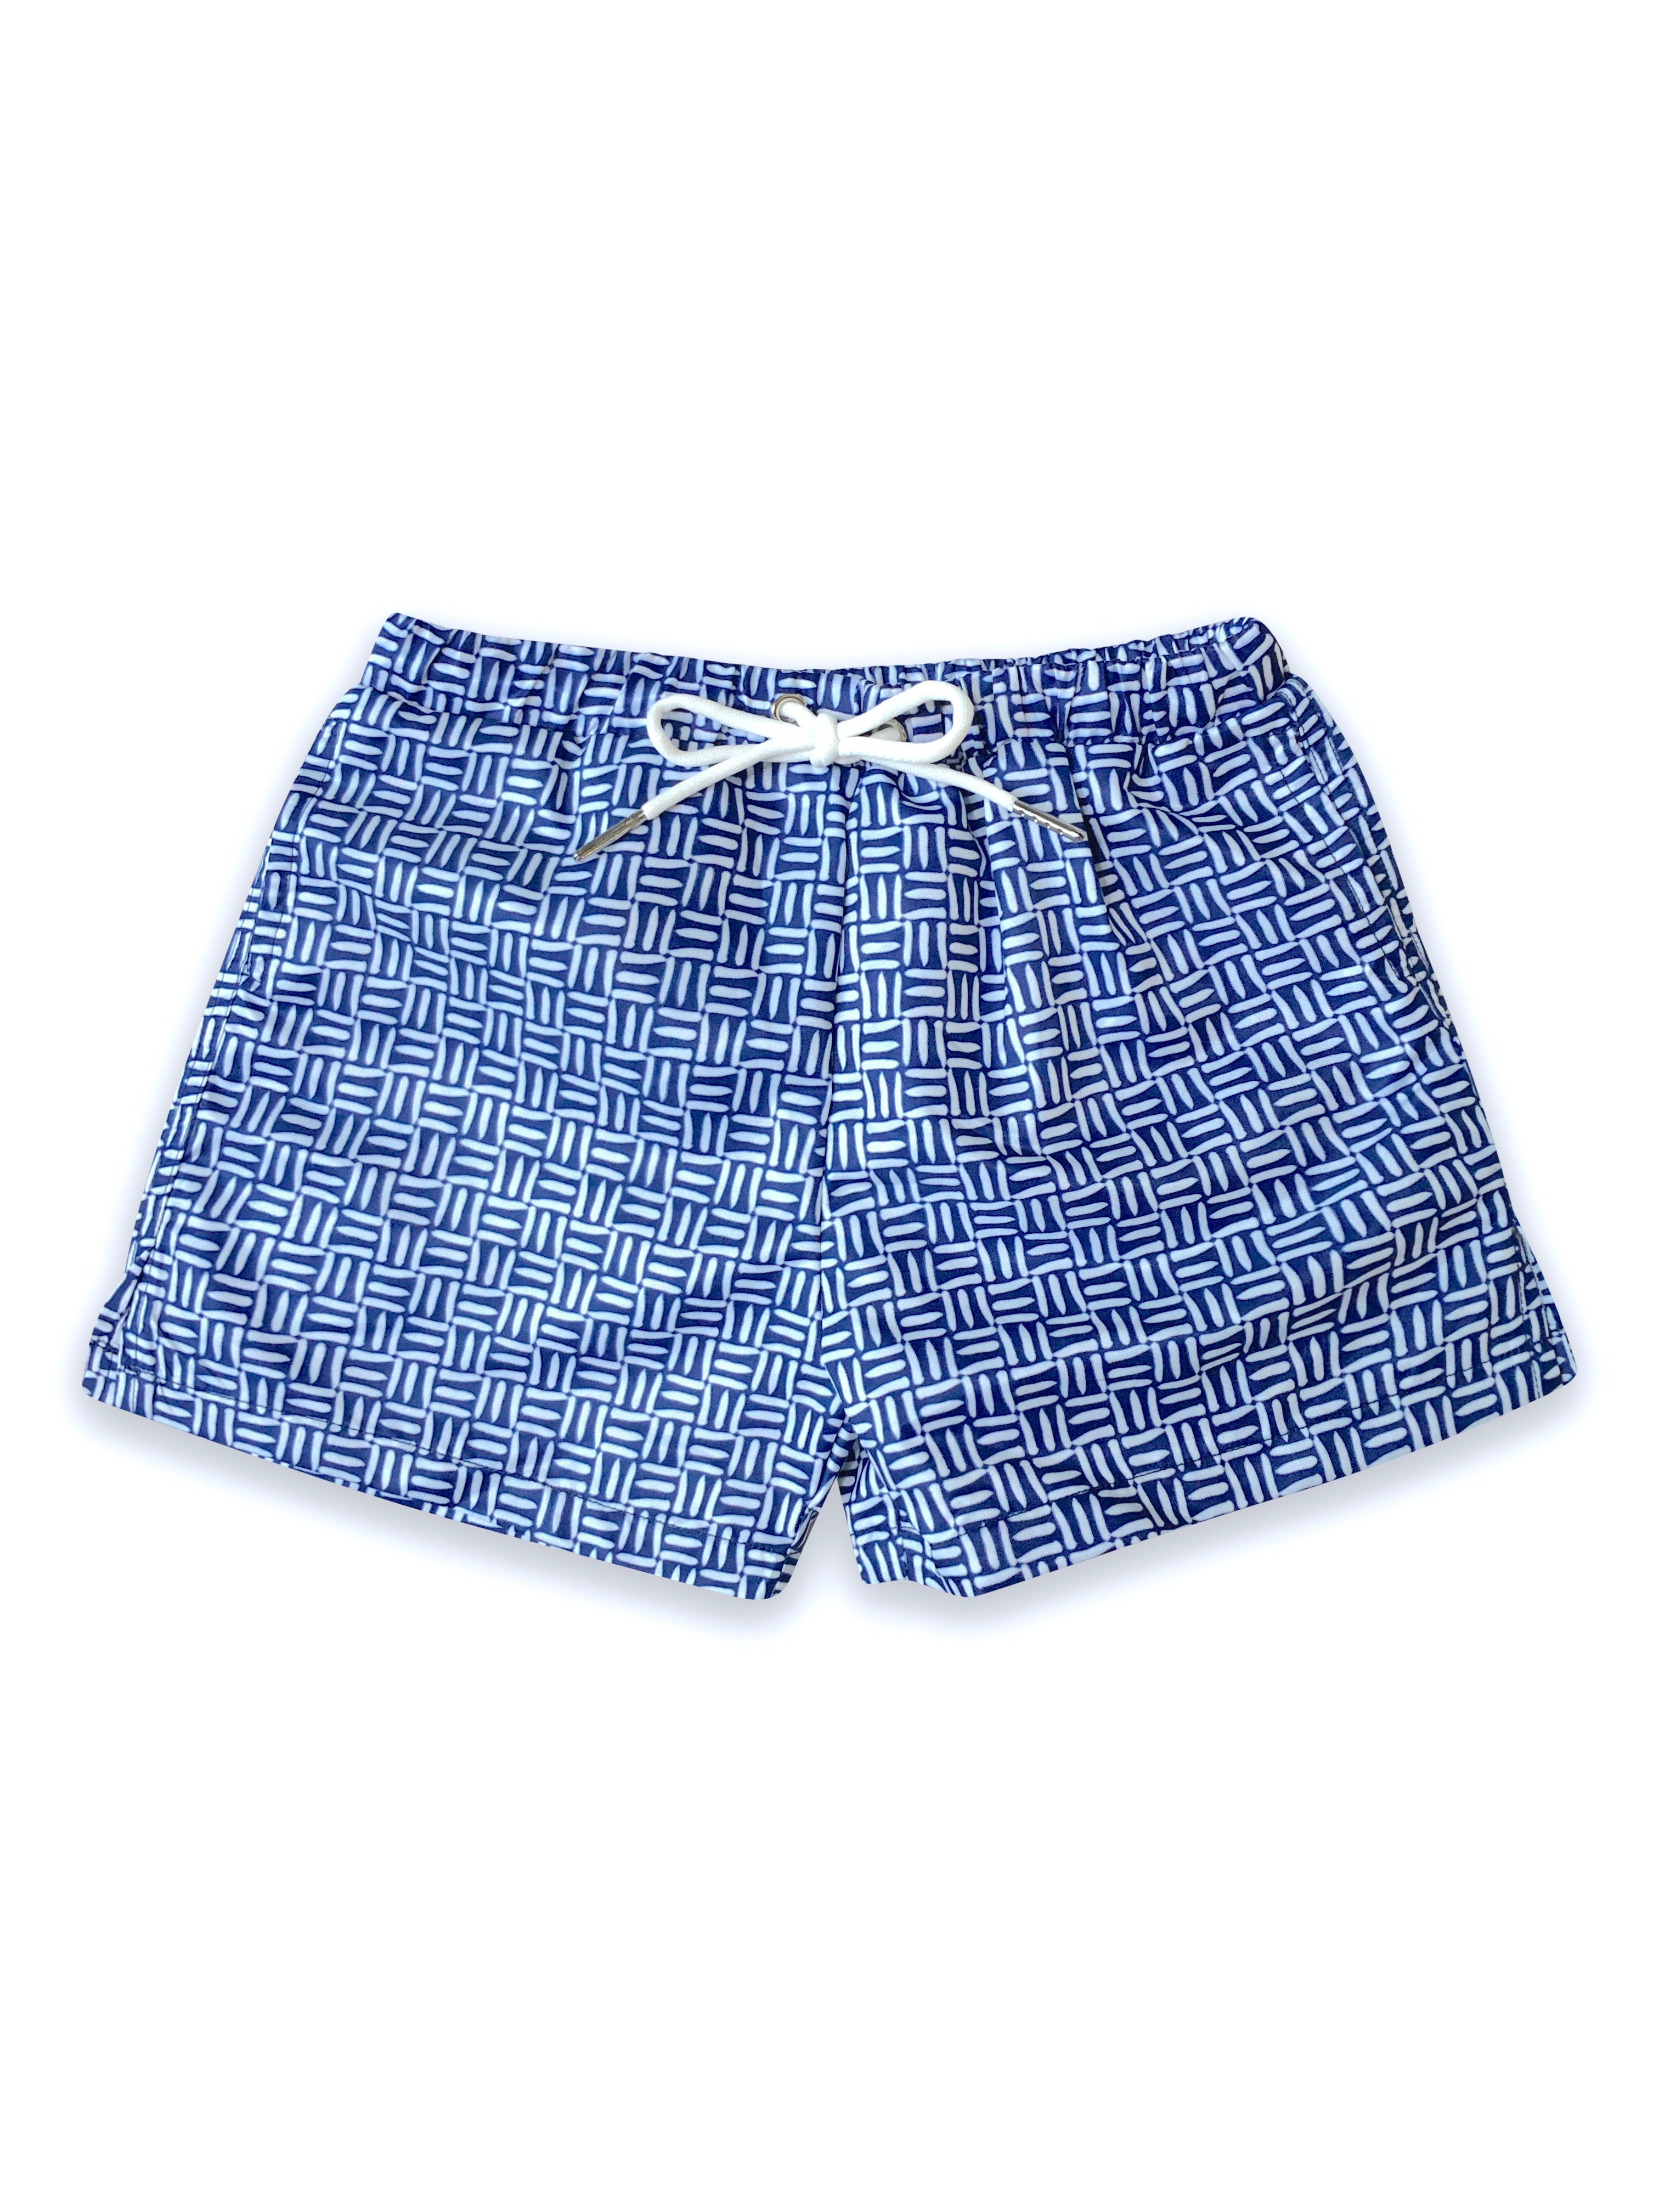 Boys Swimsuits Singapore | August Society